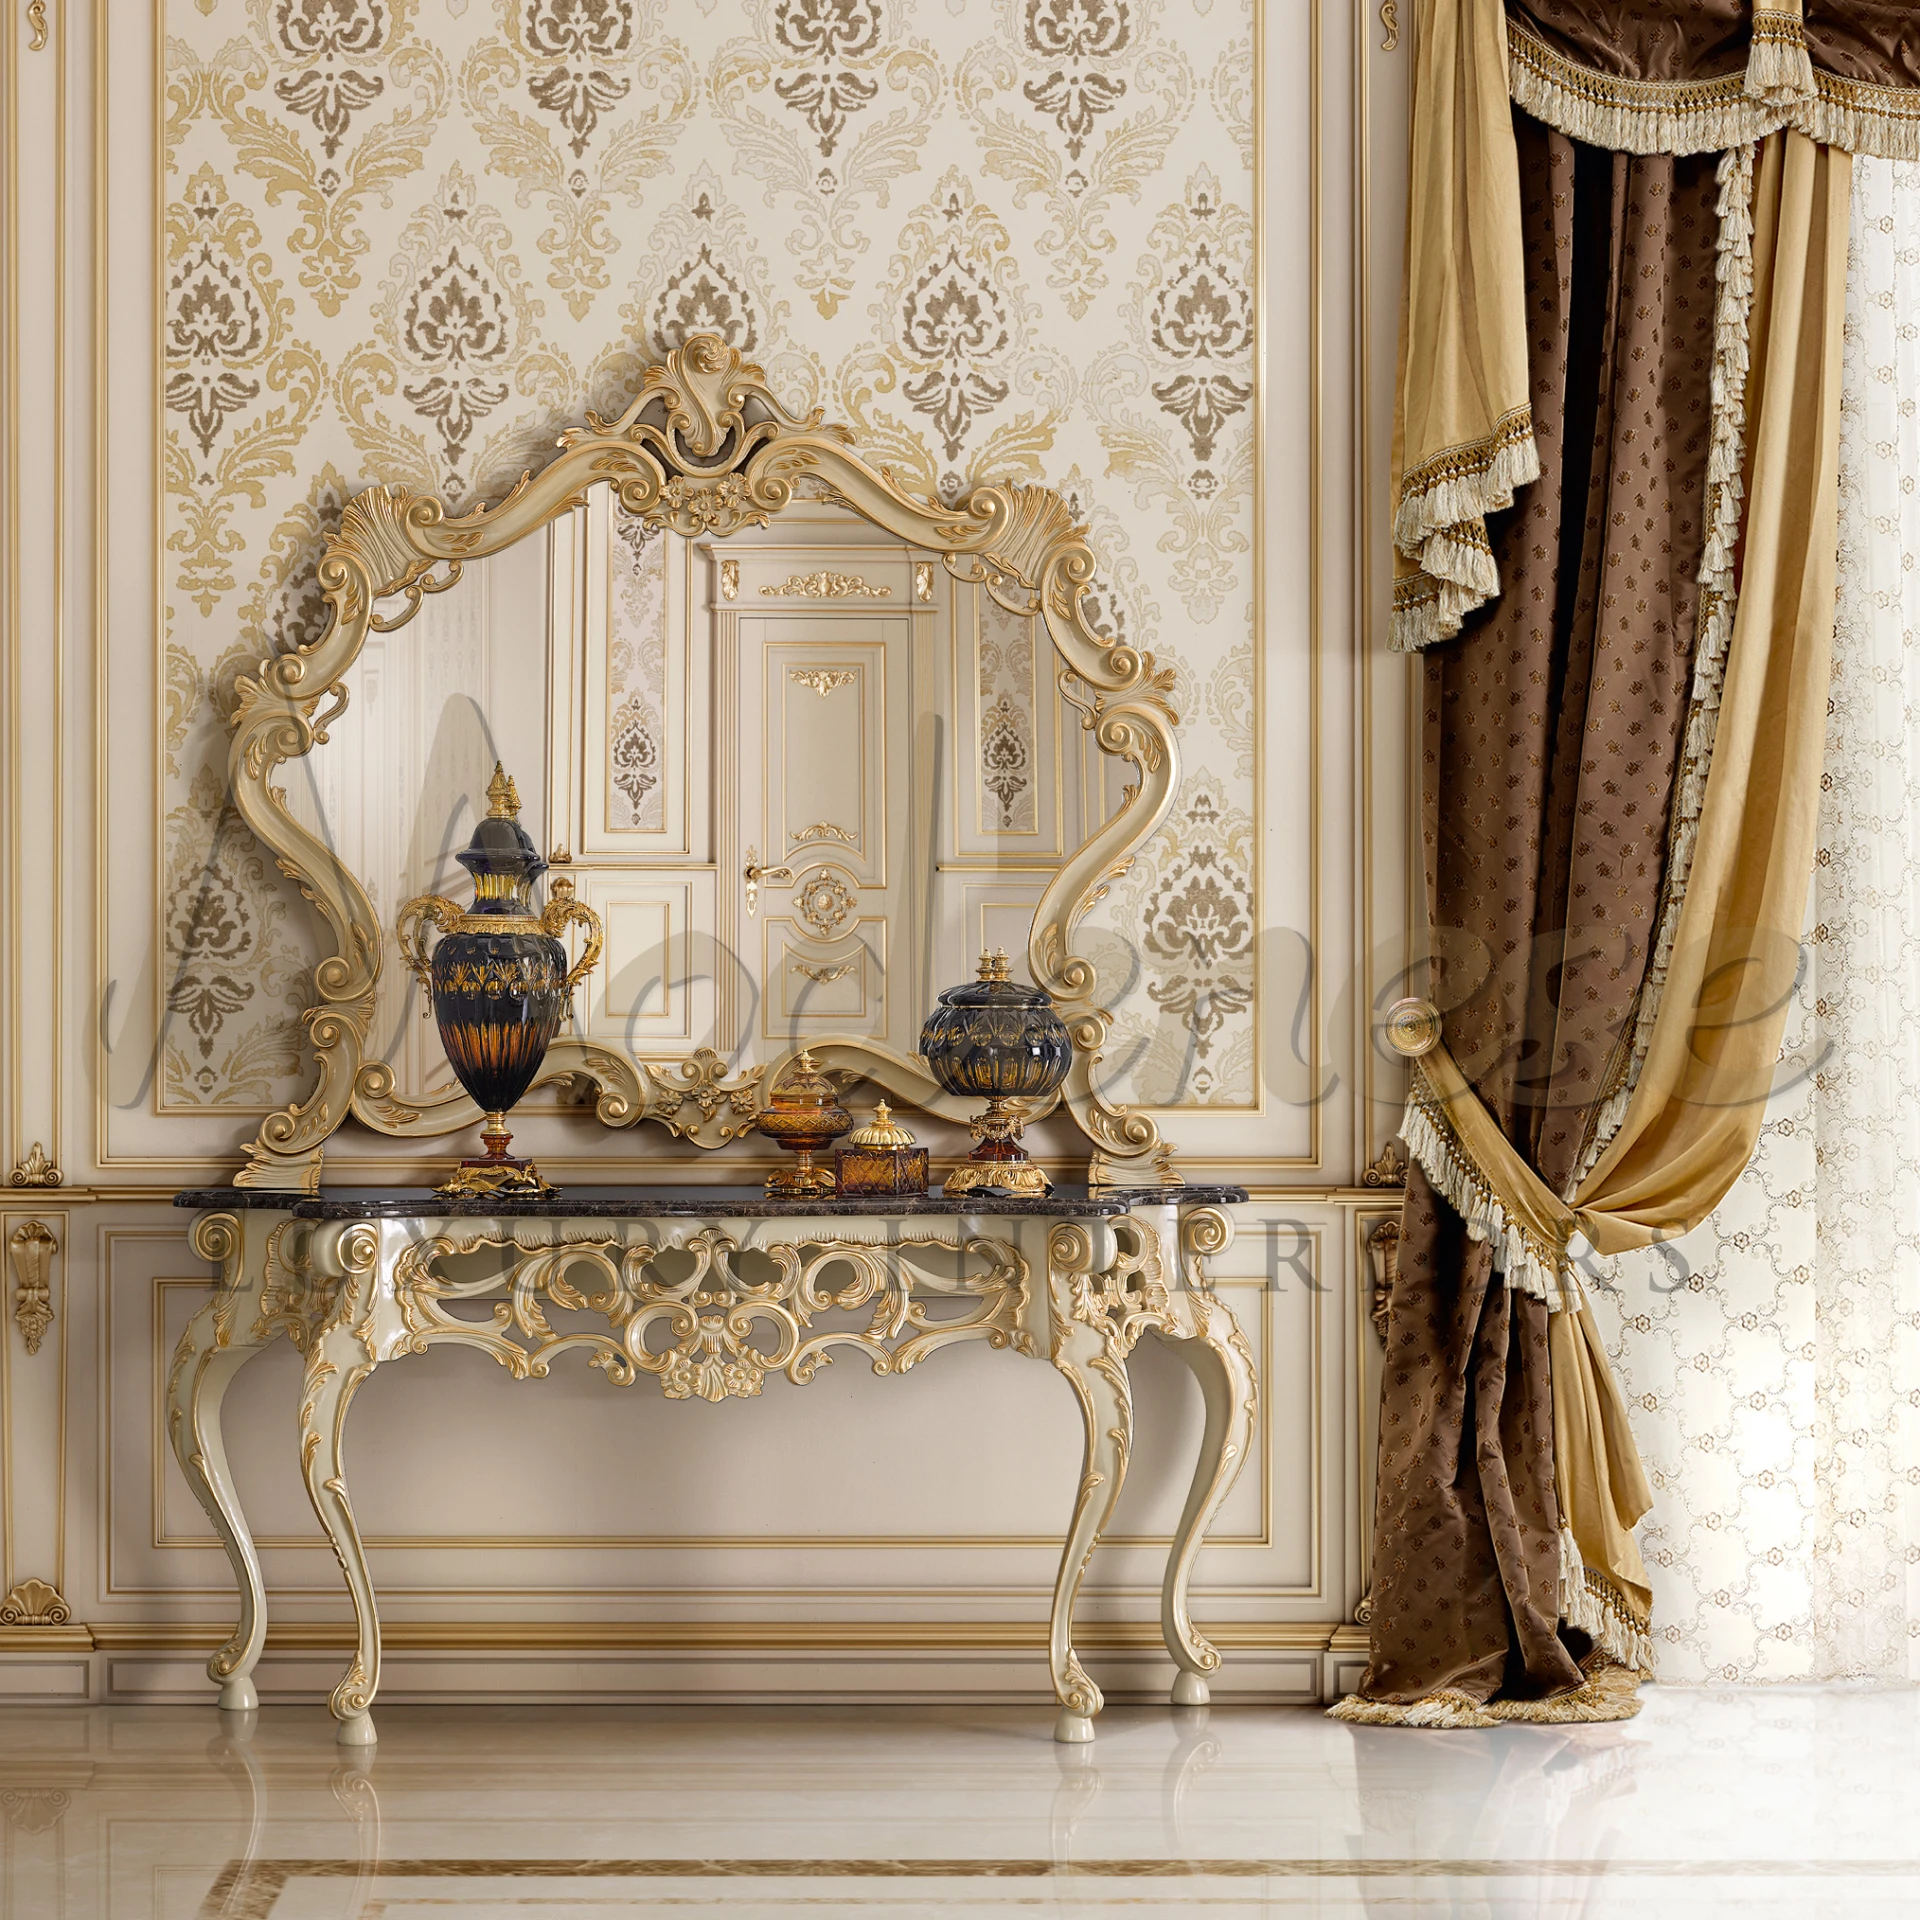 Baroque Design Refined Console, made in Italy with gold leaf carving and customizable top, enriching classic interiors.